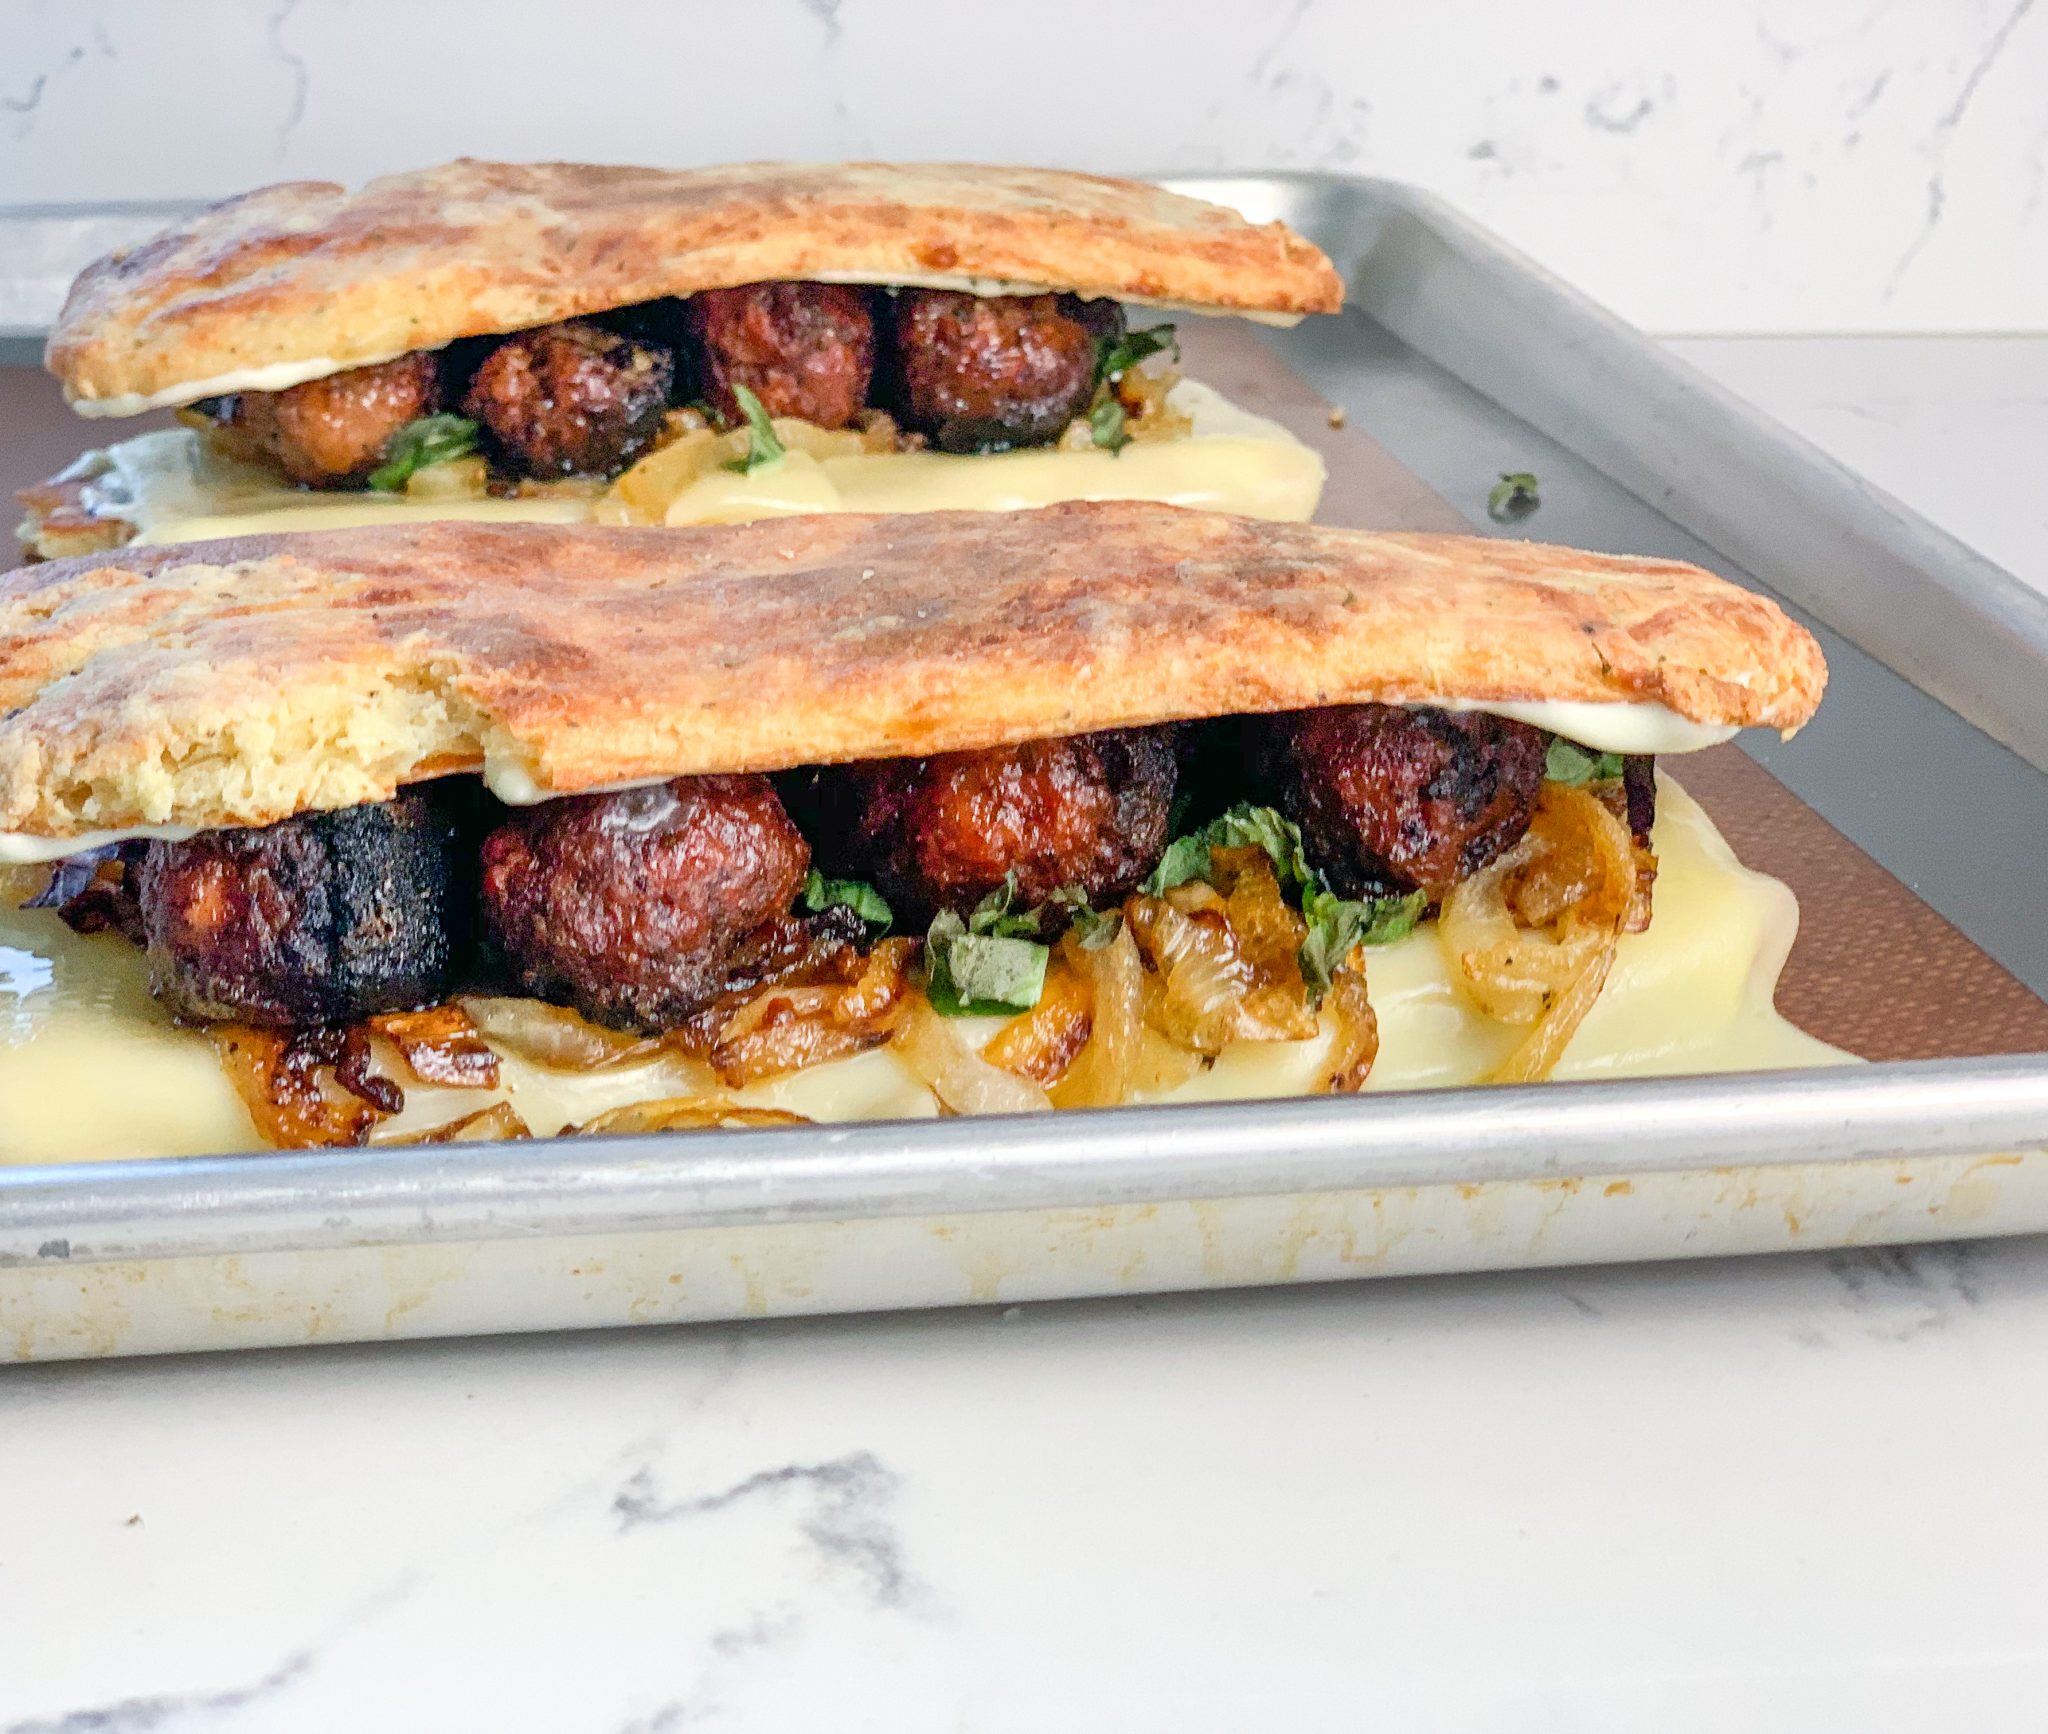 Meatball Sub Sandwich on Low Carb Bread photo from mincerepublic.com